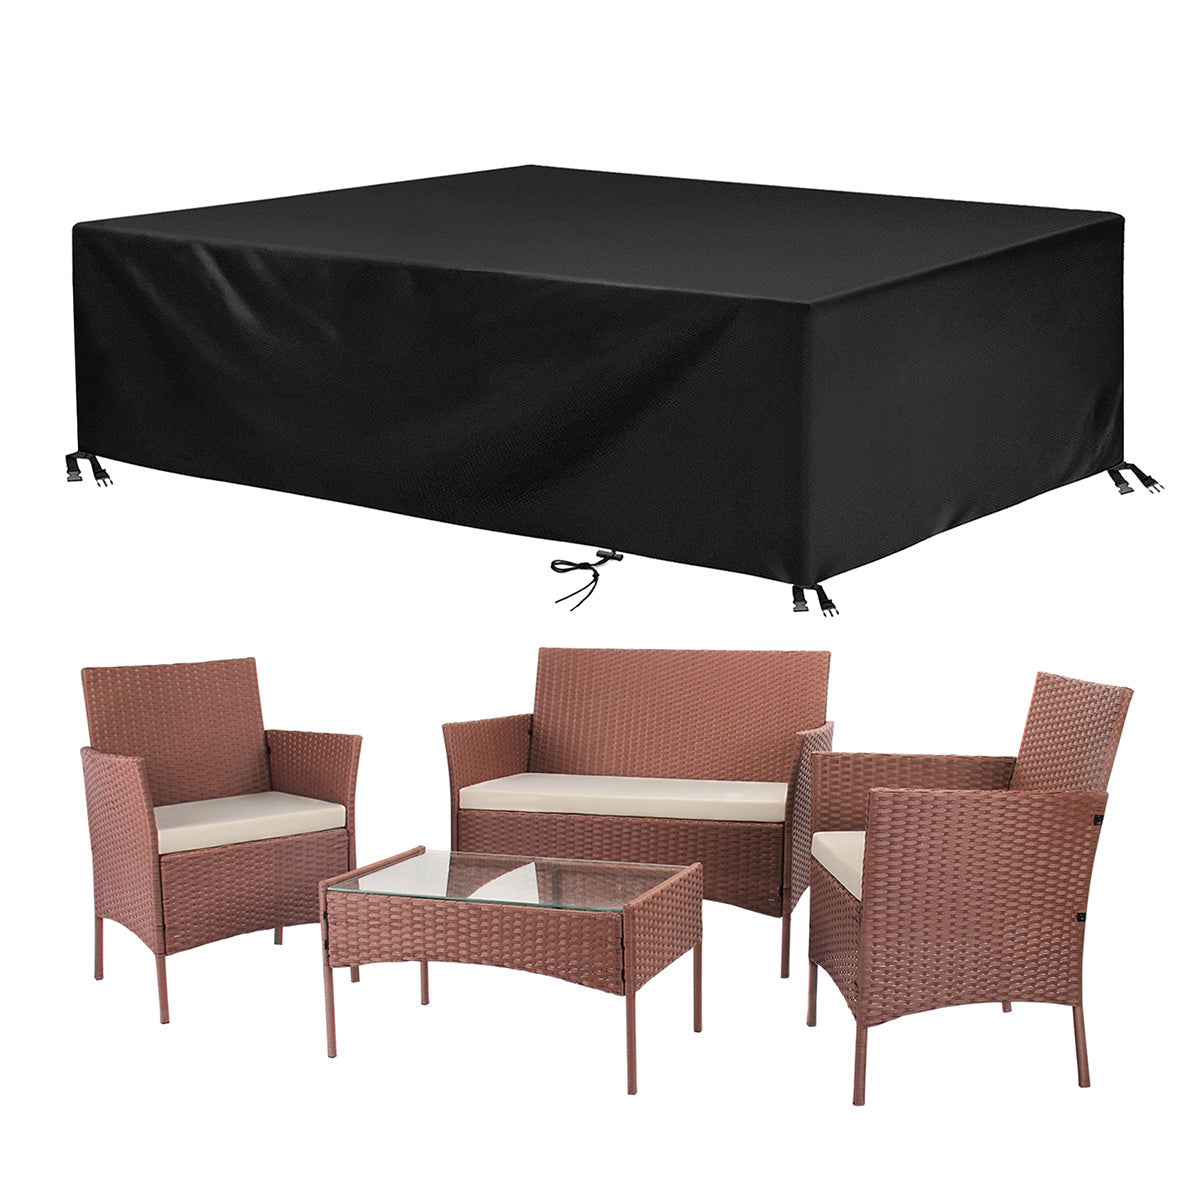 Image of 4-Seater Rattan Garden Furniture Patio Conversation Set Table Chairs, Brown / With Cover